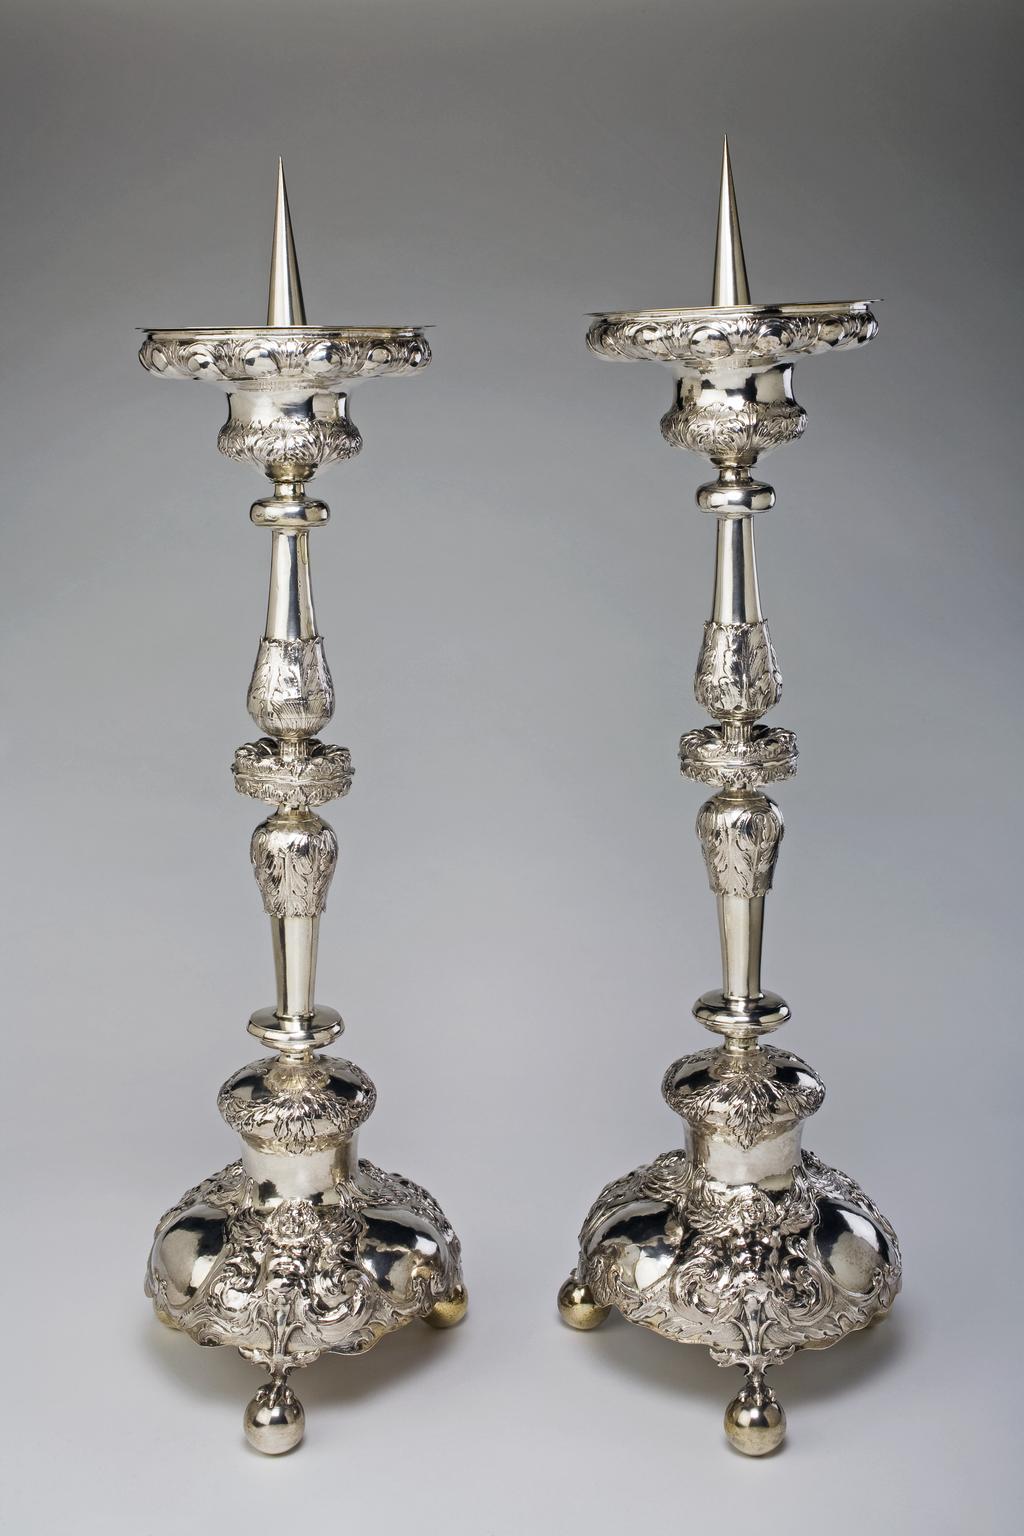 An image of One of a pair of altar candlesticks.MAR.M.76B-1912: Altar candlestick. Unknown silversmith, Netherlands, Dutch. The pricket candlestick embossed and chased with cherubs, gadroons and foliage. Only the pricket and drip pan are silver-gilt. Thse are supported on a bell-shaped sconce, which is embossed and chased with a border of gadroons and leaves. The stem comprises two balusters - one inverted - each with a plain knop at the outer end and an acanthus leaf embossed inner end, meeting in a flattened gadroon and leaf embossed and chased knop. The bell-shaped foot is embossed and chased with a border of swags, leaves and ribbons above three winged cherubs with vacant cartouches between. The three ball feet are each surmounted by a claw with leaf capital. Silver and silver-gilt, wooden base, height, overall, 74.3 cm, diameter, base, 20.2 cm, approximate, circa 1650-1700. Notes: The roundels of Christ are after plaquettes by an artist in the workshop of Matthias Wallbaum (1554-1632). MAR.M.76B-1912: Altar candlestick. Unknown silversmith, Netherlands, Dutch. The pricket candlestick embossed and chased with cherubs, gadroons and foliage. Only the pricket and drip pan are silver-gilt. Thse are supported on a bell-shaped sconce, which is embossed and chased with a border of gadroons and leaves. The stem comprises two balusters - one inverted - each with a plain knop at the outer end and an acanthus leaf embossed inner end, meeting in a flattened gadroon and leaf embossed and chased knop. The bell-shaped foot is embossed and chased with a border of swags, leaves and ribbons above three winged cherubs with vacant cartouches between. The three ball feet are each surmounted by a claw with leaf capital. Silver and silver-gilt, wooden base, height, overall, 75.2 cm, diameter, base, 20.2 cm, approximate, circa 1650-1700. Notes: The roundels of Christ are after plaquettes by an artist in the workshop of Matthias Wallbaum (1554-1632).